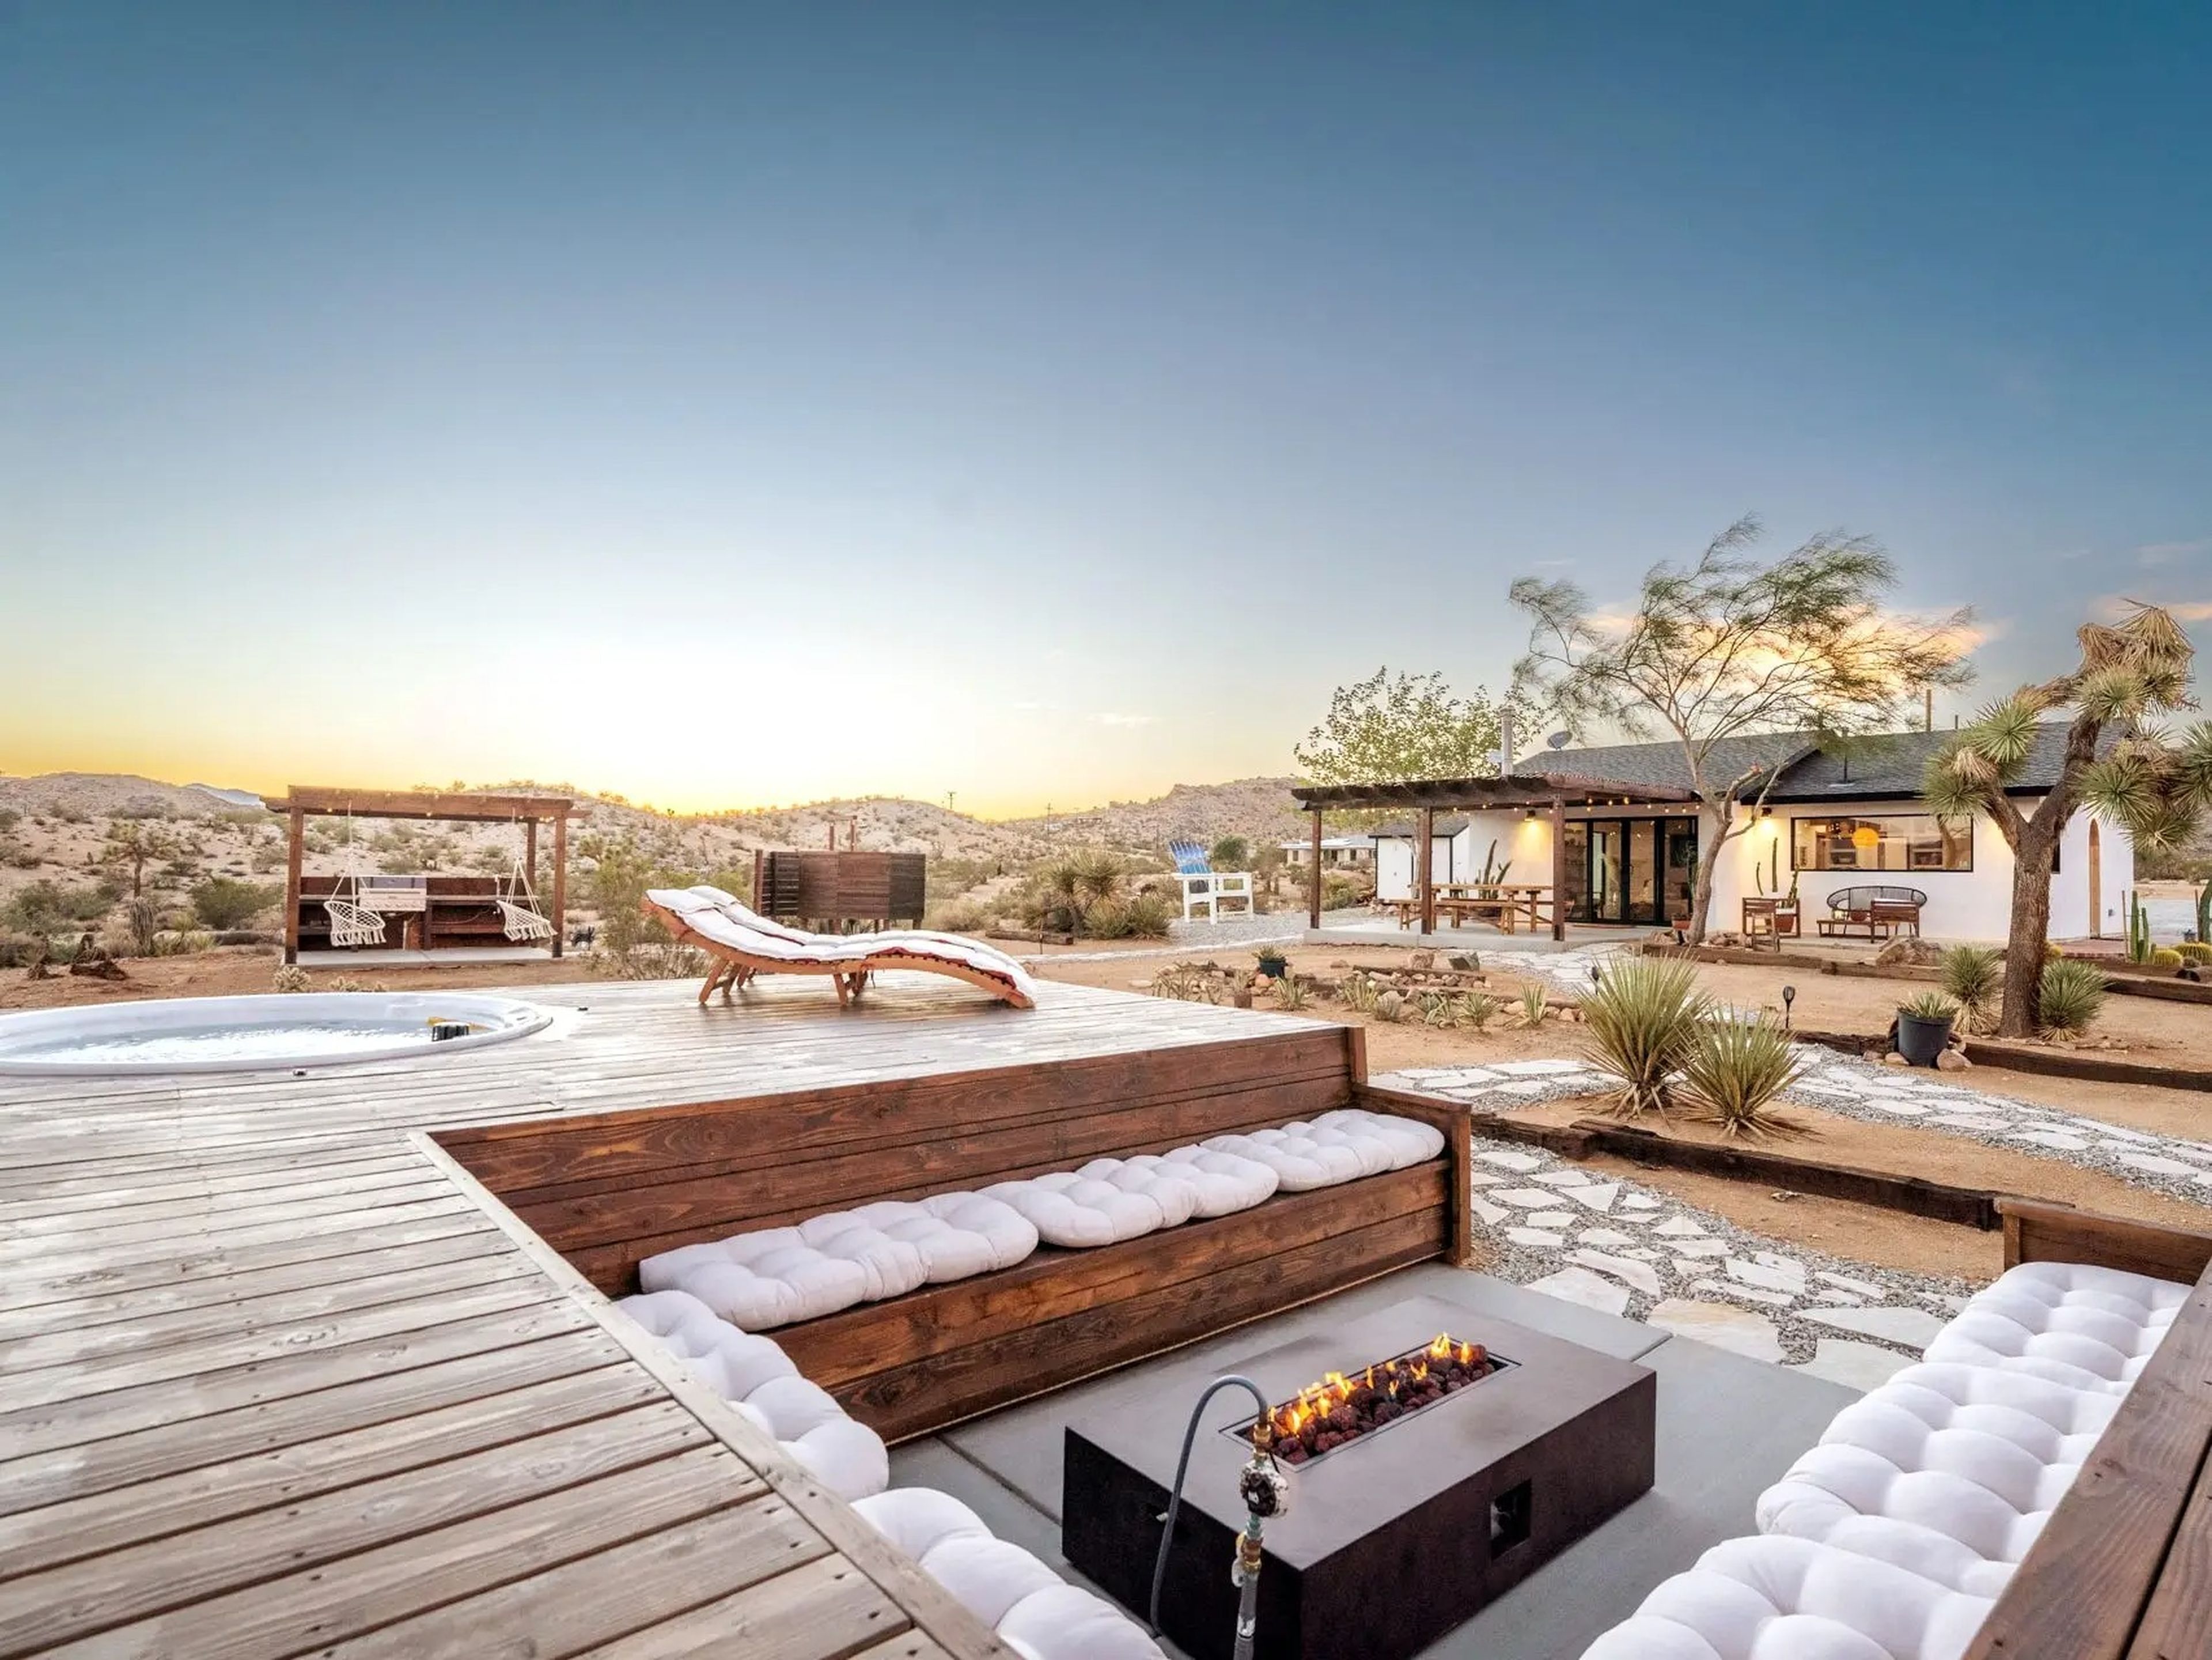 Casa Coyotes is a luxurious Airbnb near the Joshua Tree National Park in California